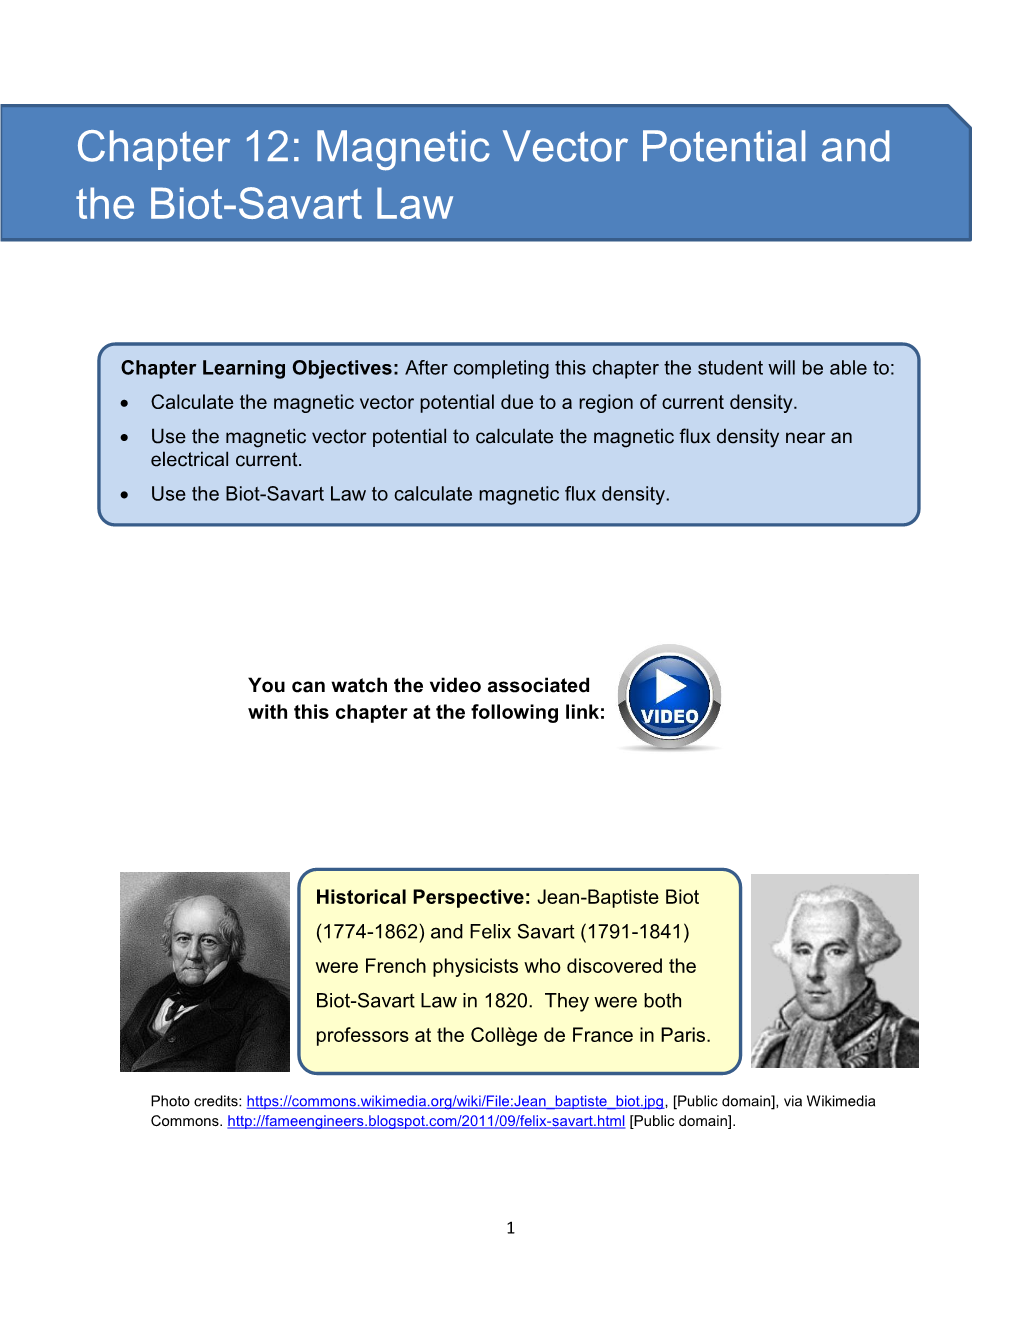 Magnetic Vector Potential and the Biot-Savart Law